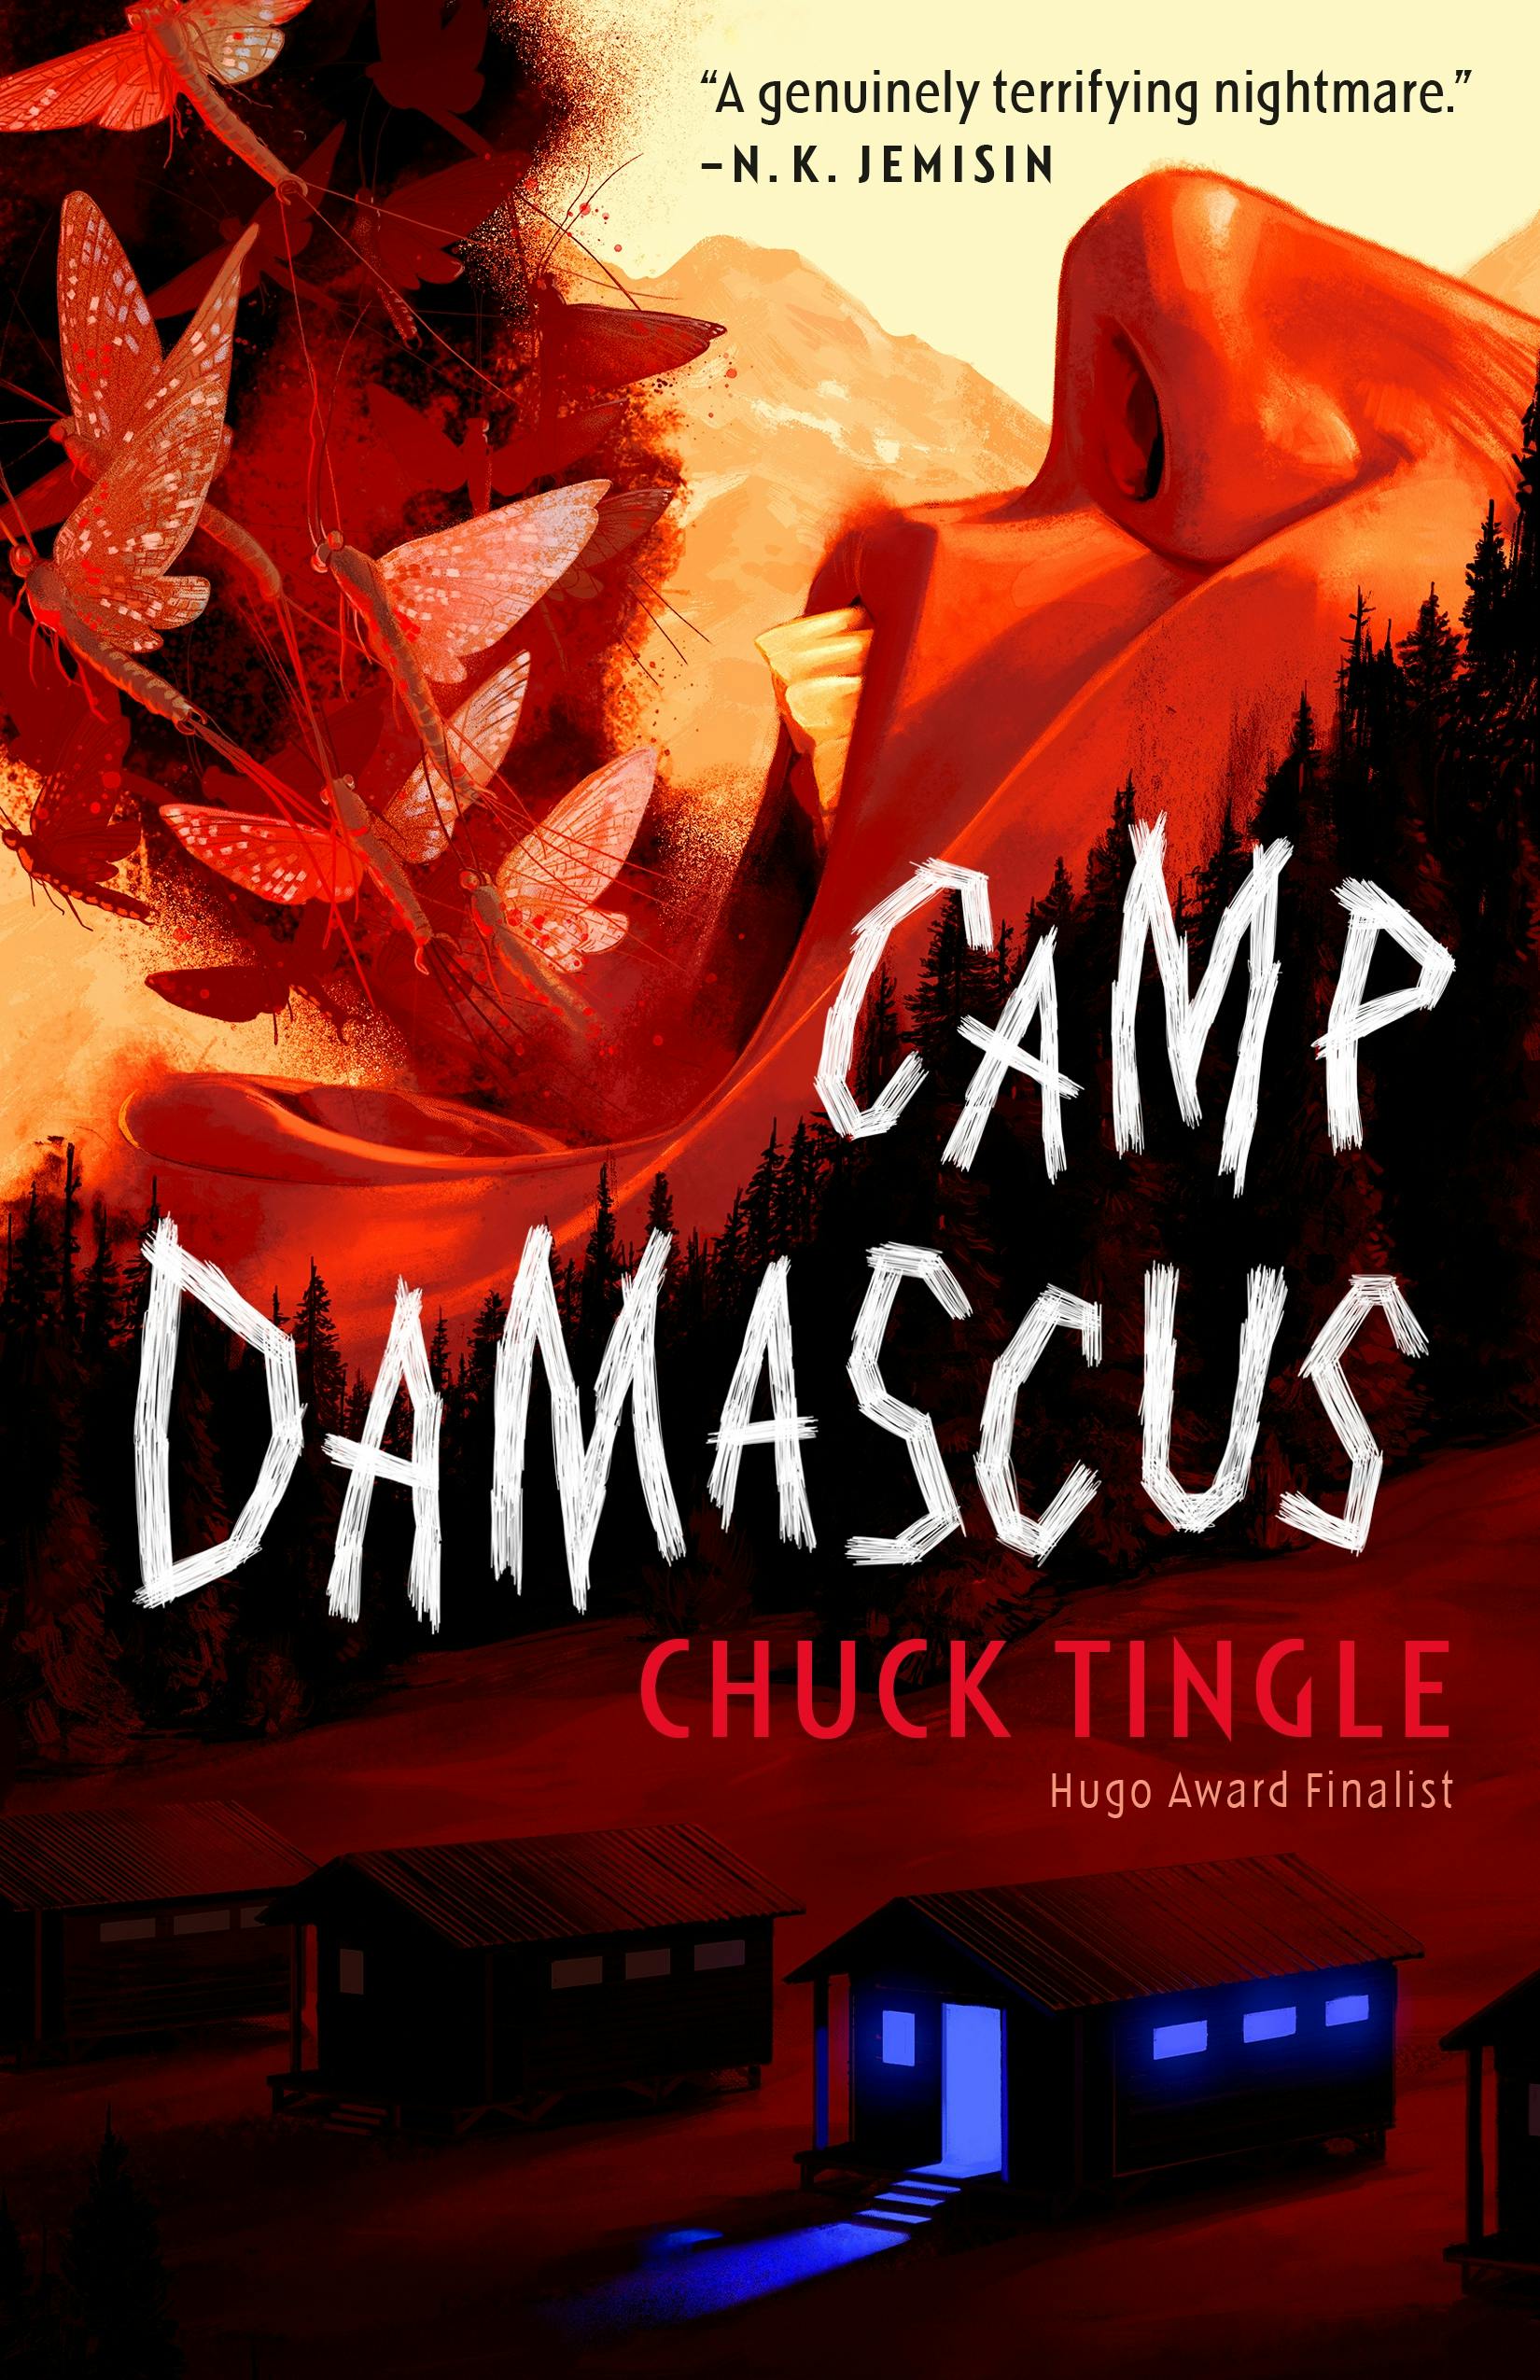 Cover for the book titled as: Camp Damascus